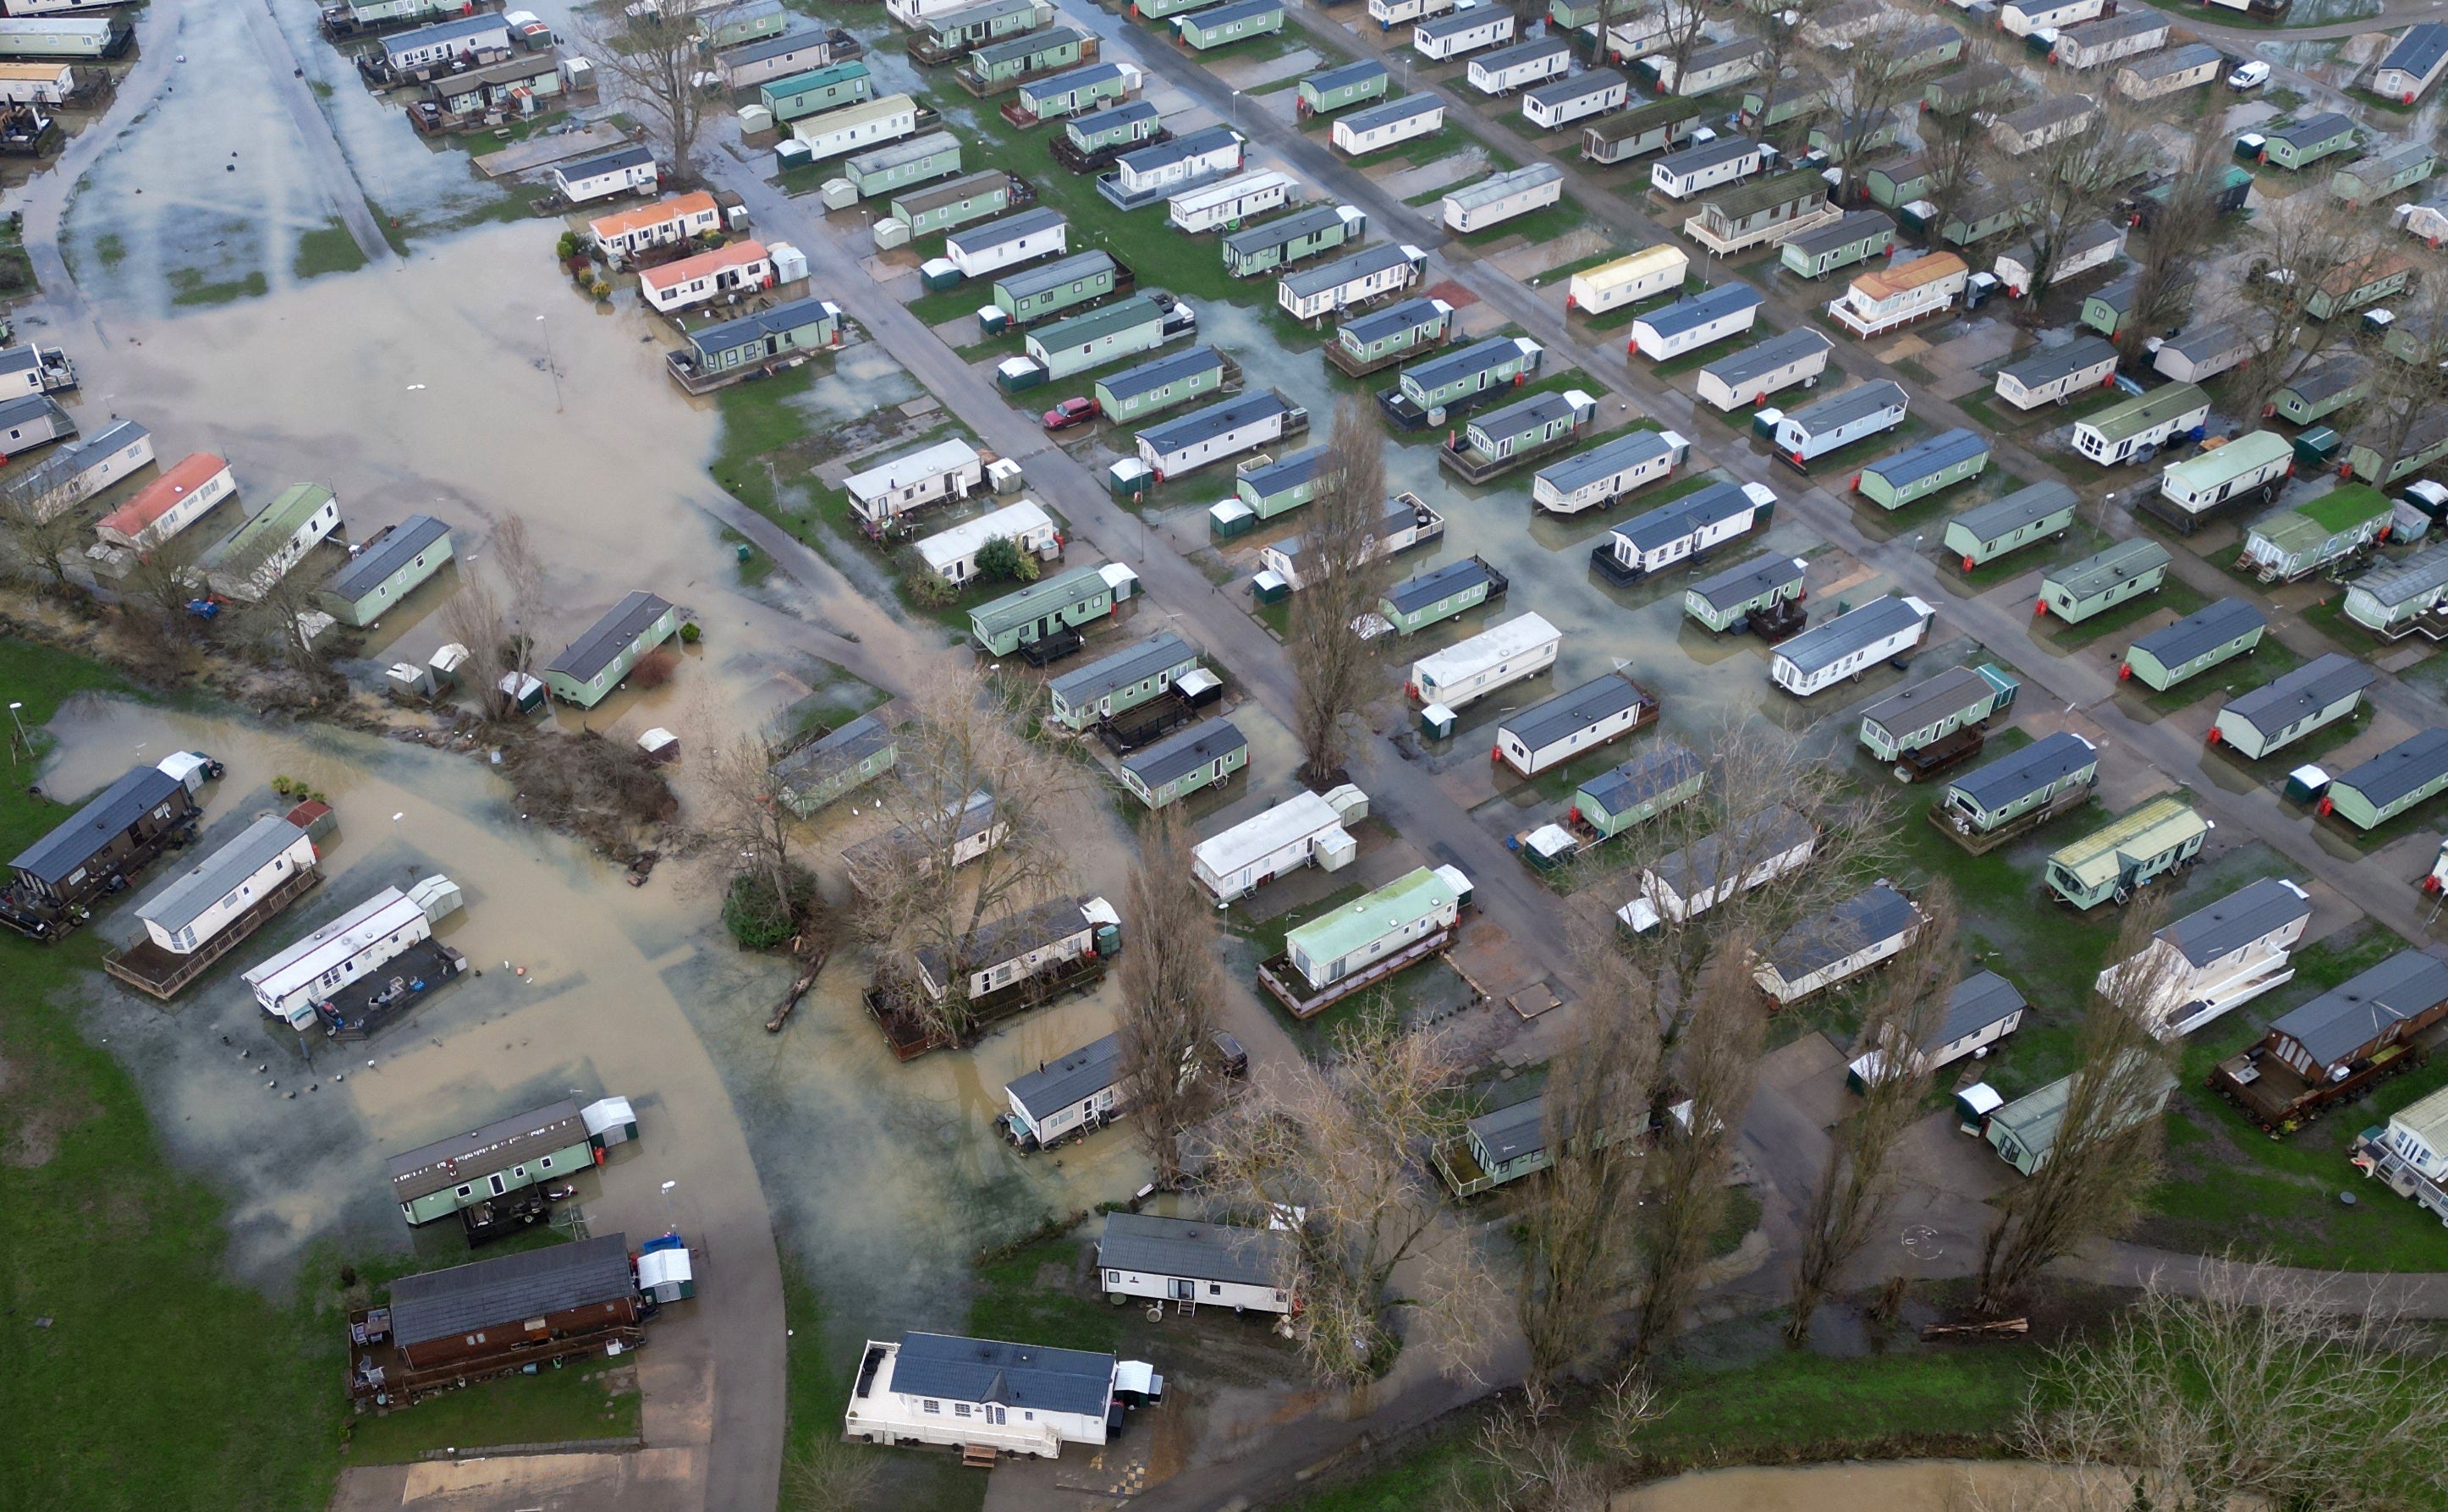 Billing Aquadrome in Northamptonshire was flooded just after families fled the region after a warning was issued